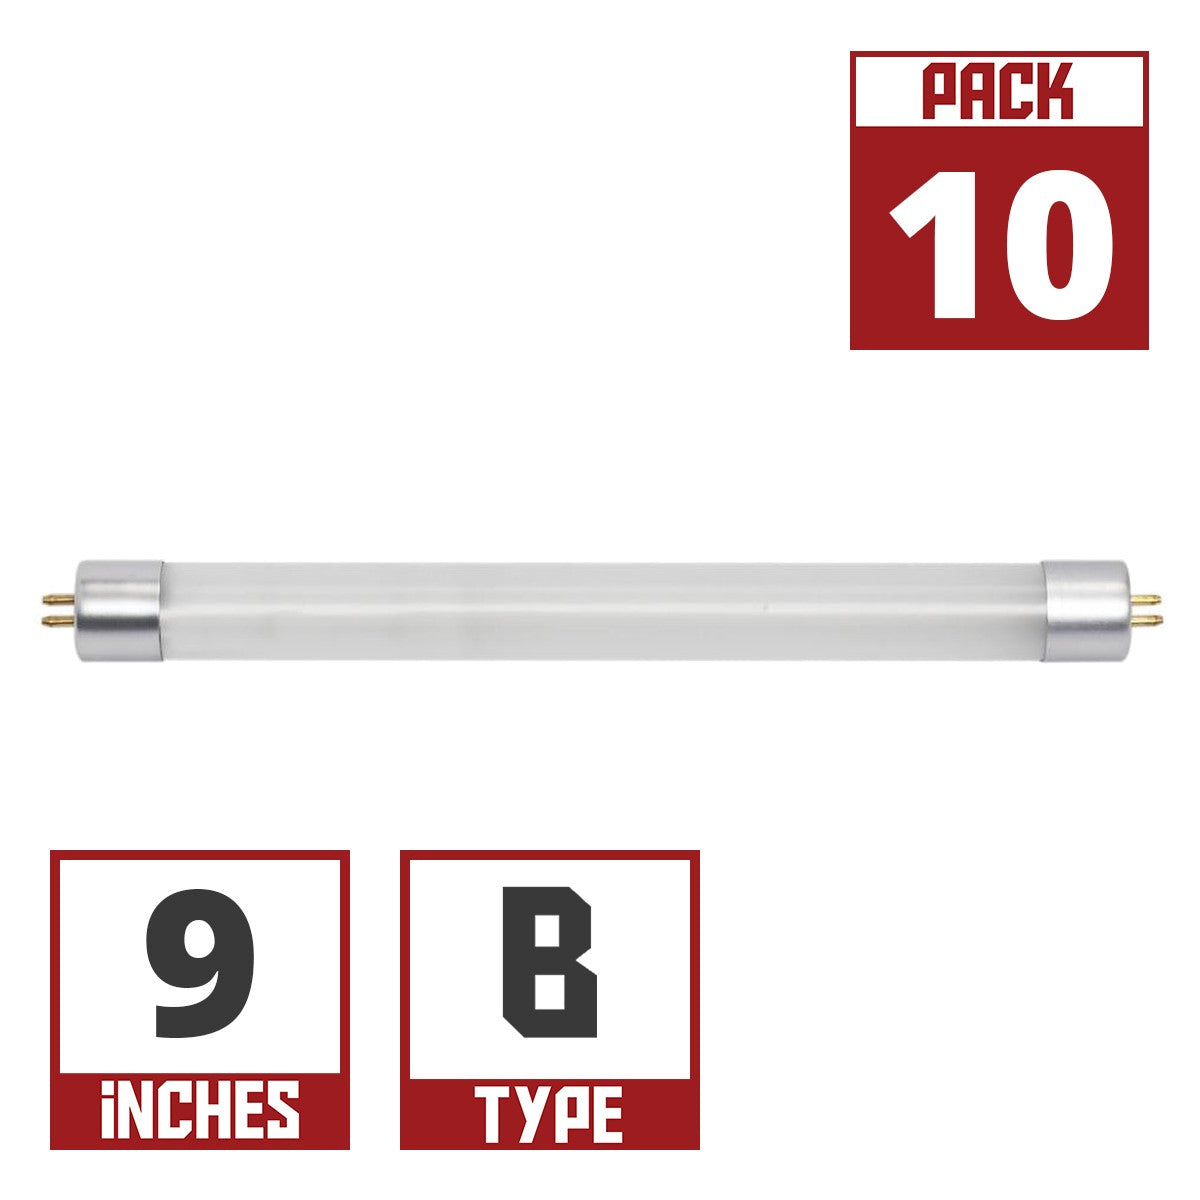 9 Inch LED mini T5 Tube, 3 Watt, 270 Lumens, 4000K, F6T5 Replacement, Ballast Bypass Double End, G5 Base (Case Of 10) - Bees Lighting